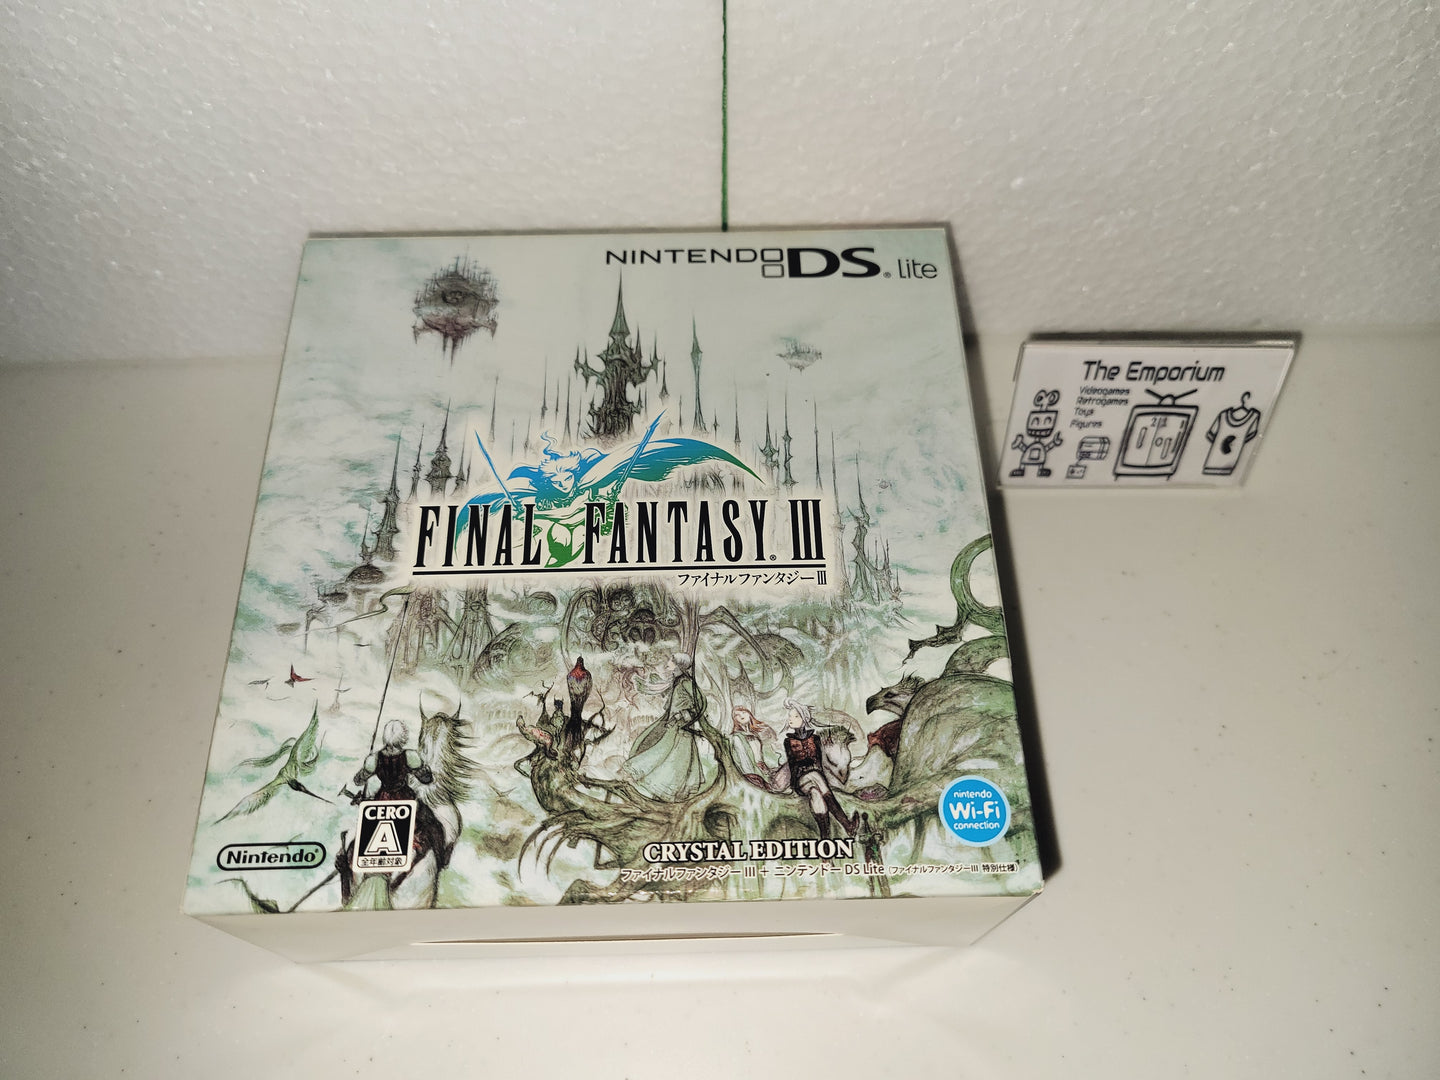 Nintendo DS Lite FINAL FANTASY III limited edition console
- nintendo ds nds  japan